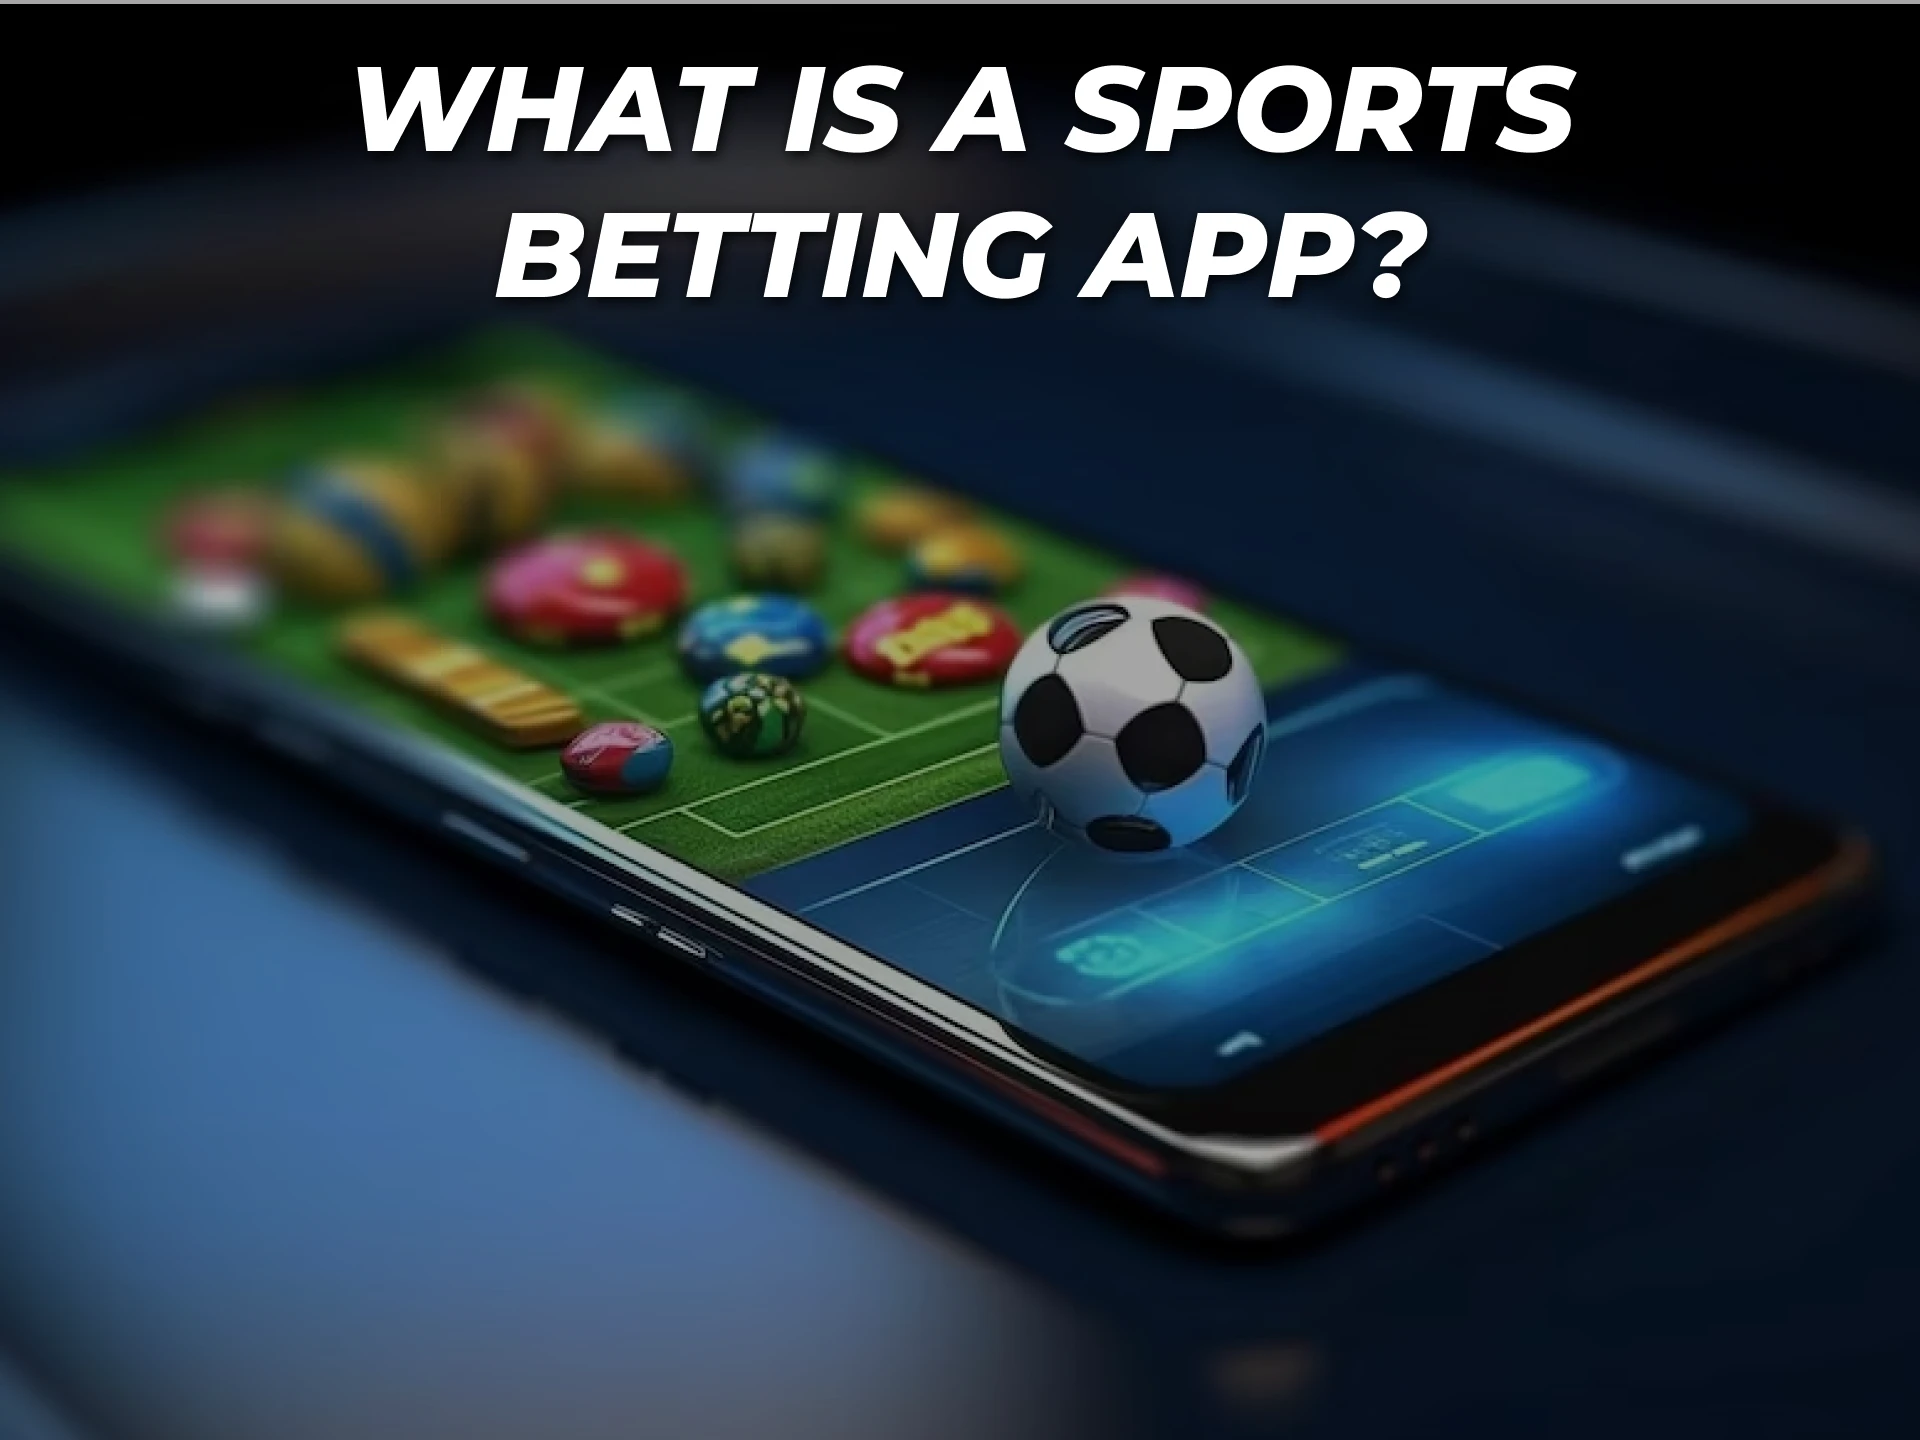 Try betting on sports using your phone.